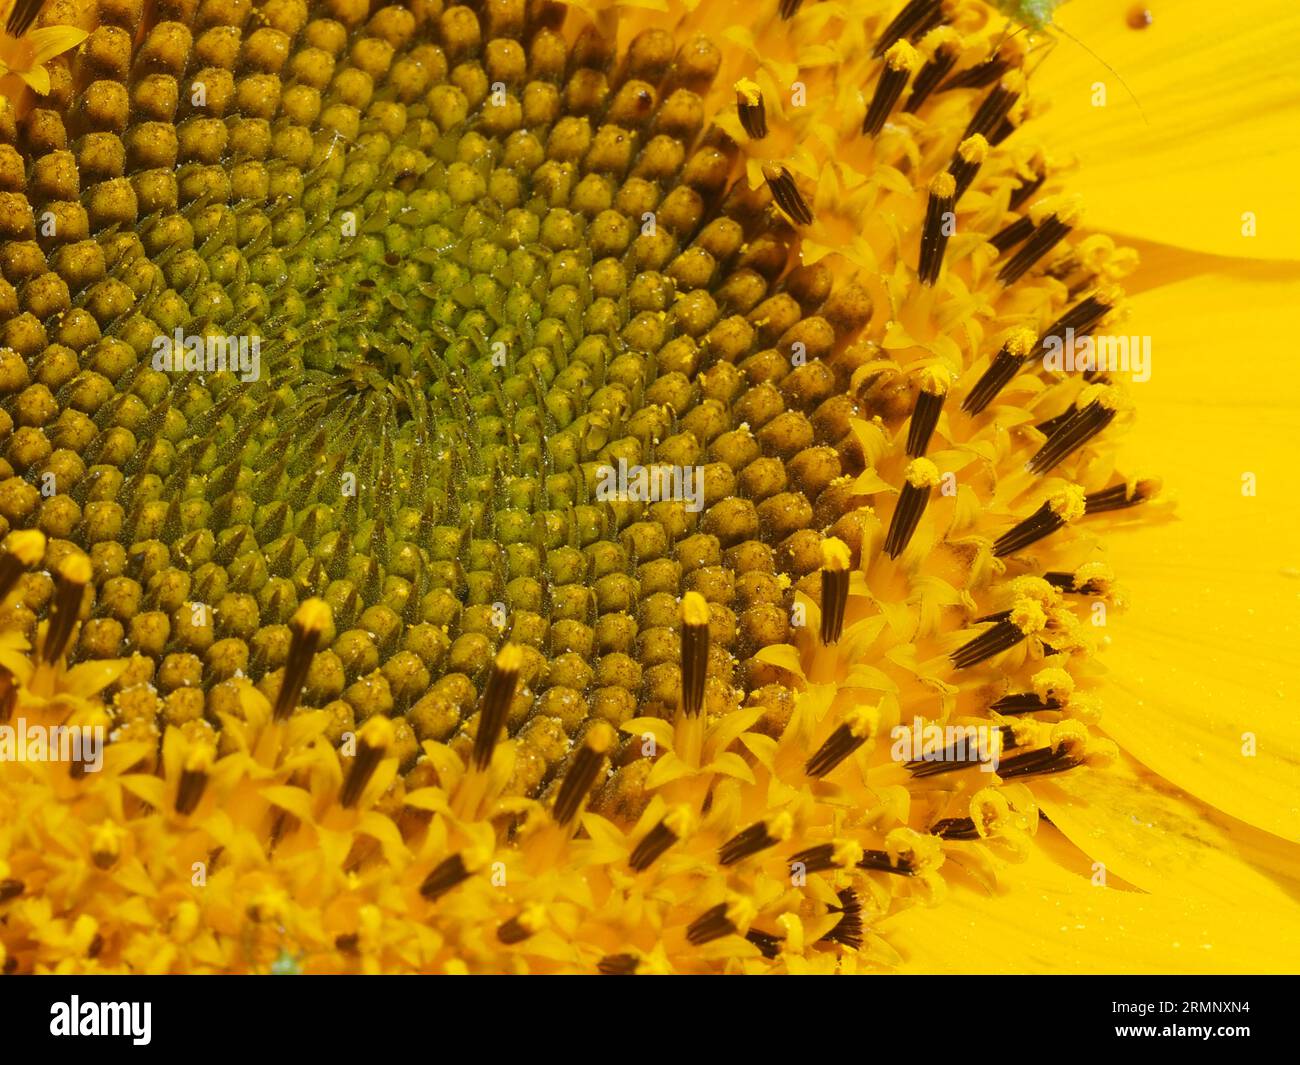 Close up of a sunflower head, Helianthus anuus, showing the inner disc florets, closed in the centre and opening towards the periphery. Stock Photo